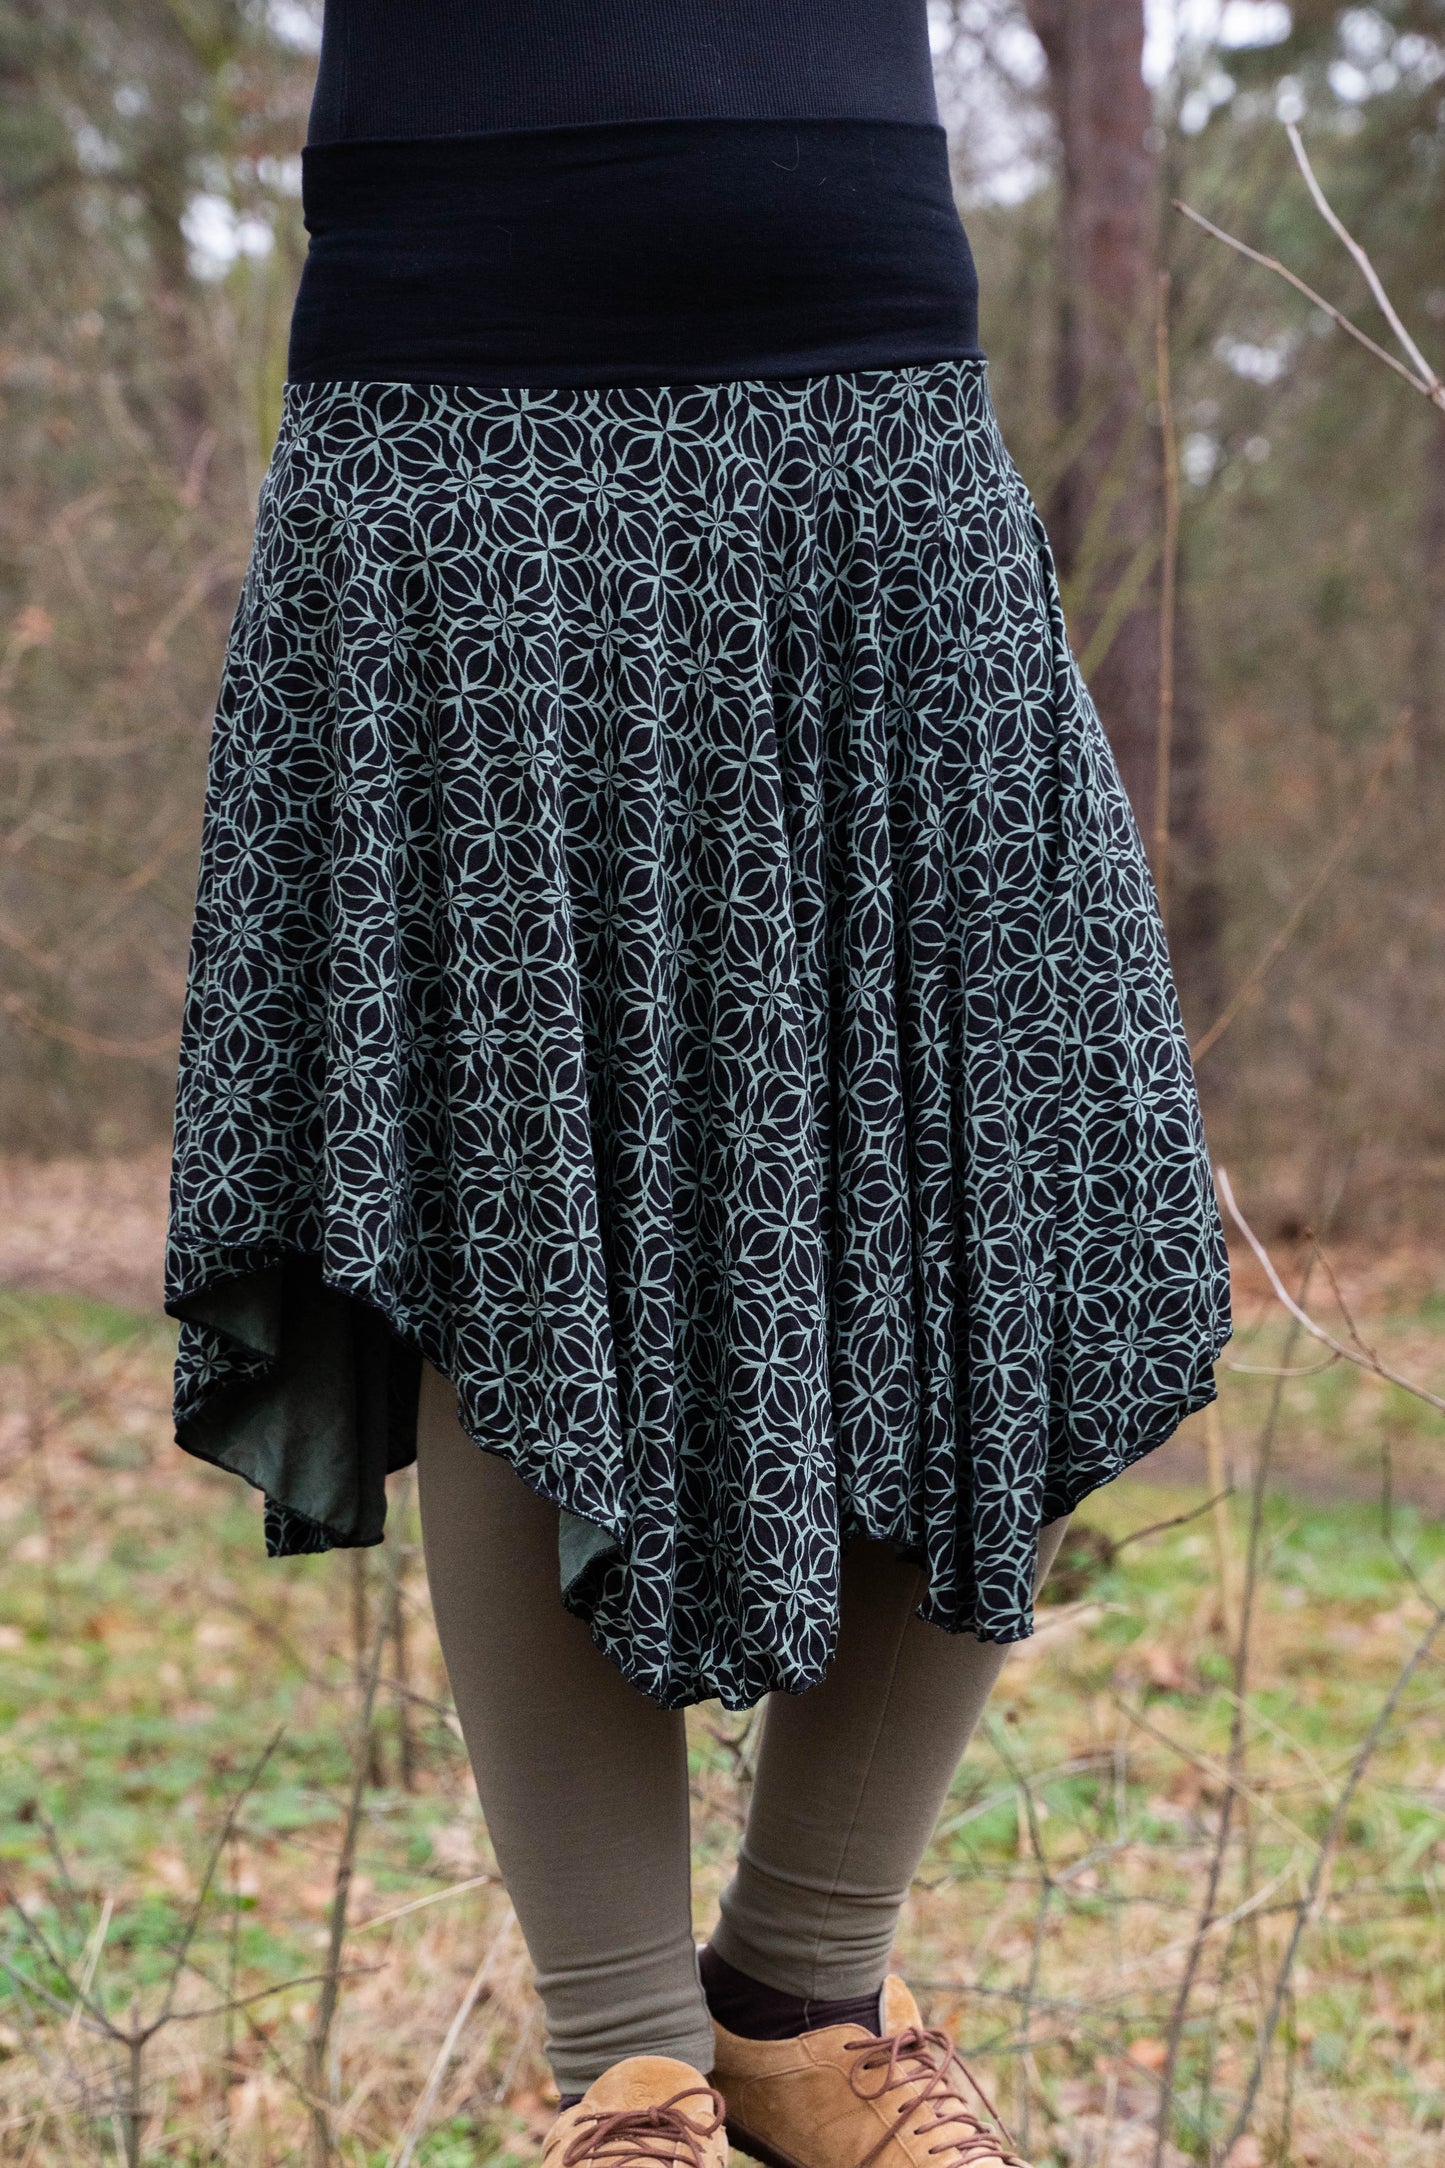 Size 36-42 pointed skirt with flower of life pattern